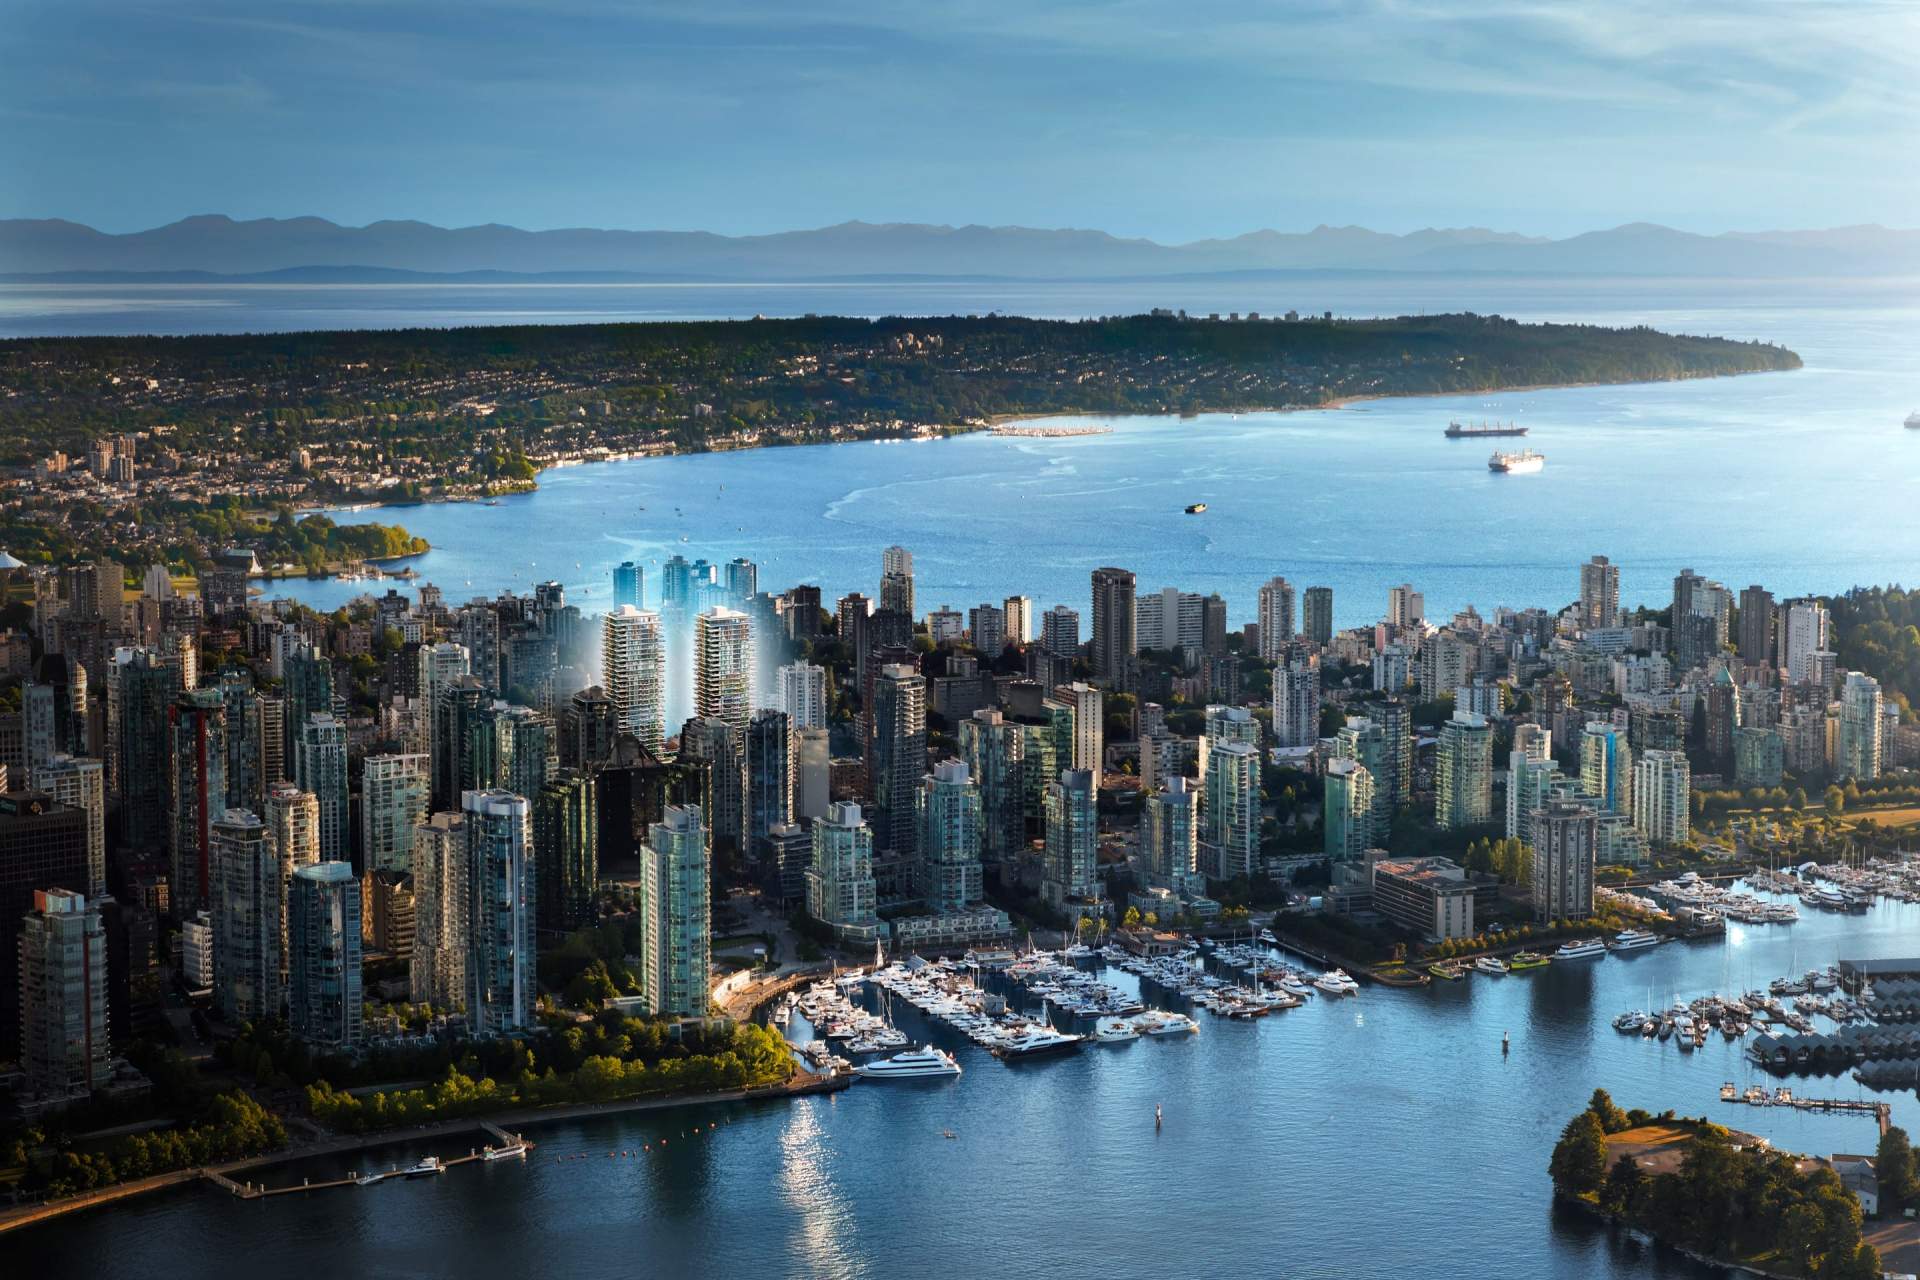 A collection of 237 ultra luxury condominiums on Vancouver's upscale shopping street.